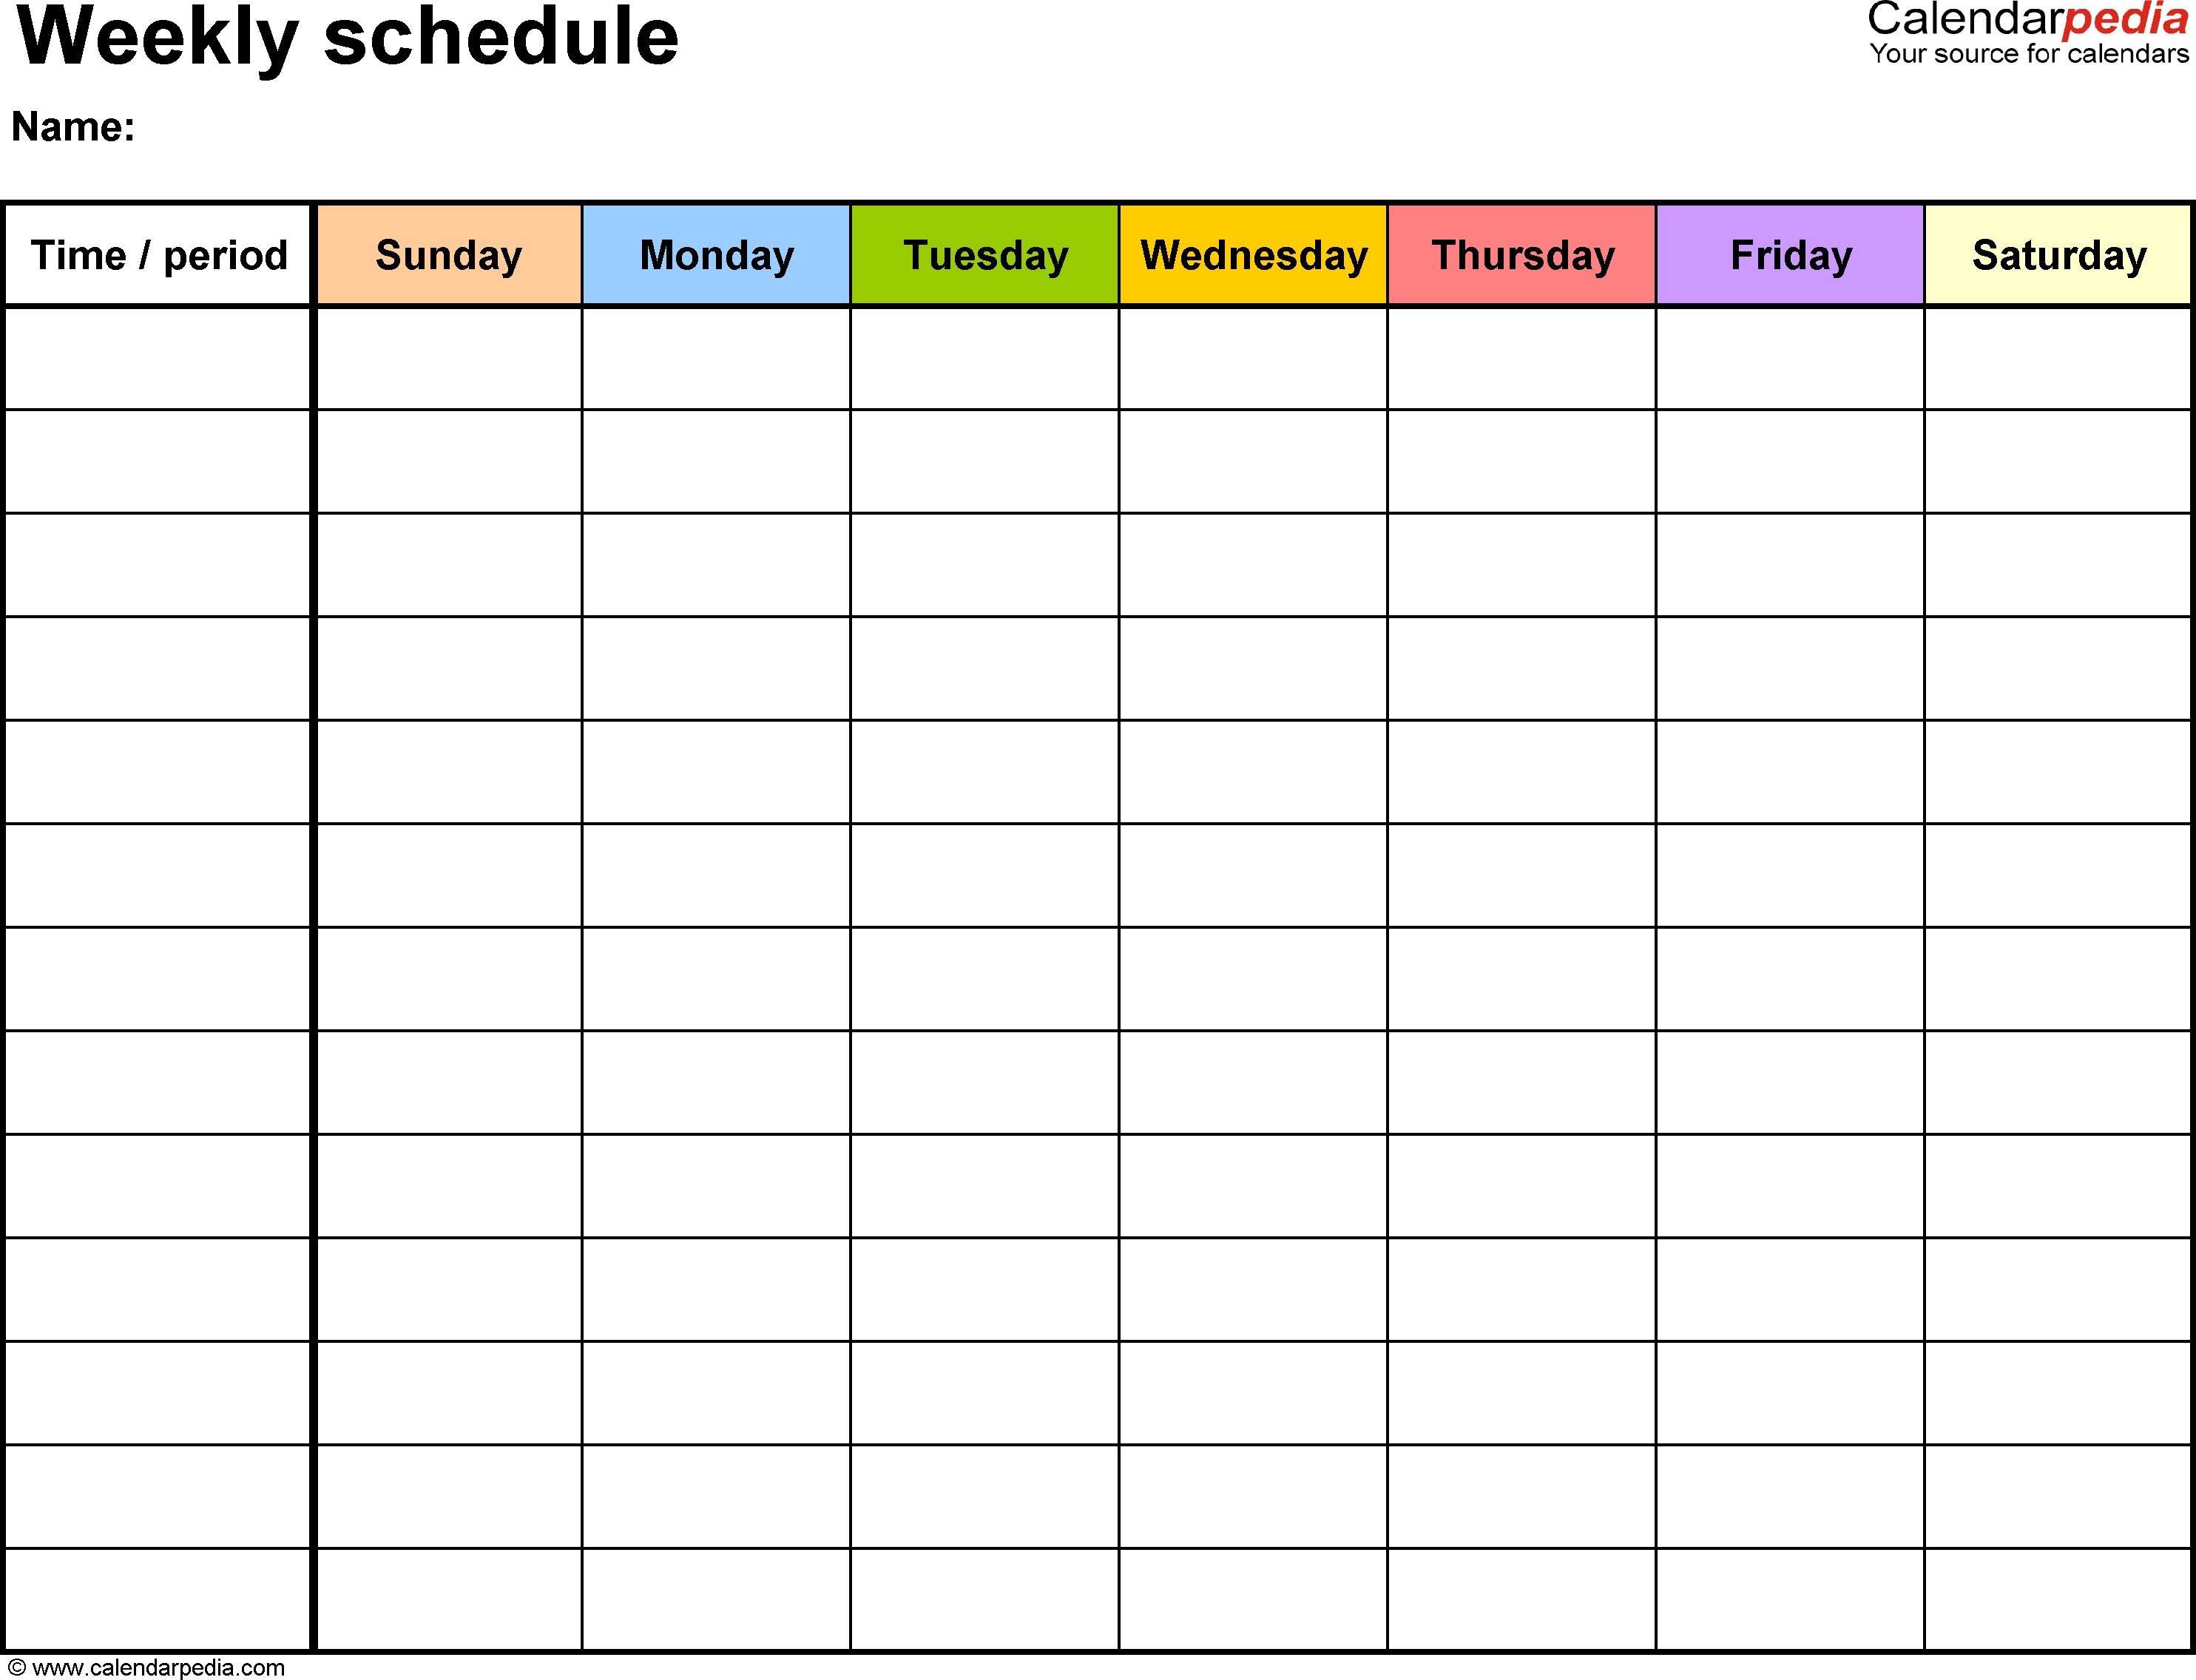 Free Weekly Schedule Templates For Word - 18 Templates intended for Friday Saturday Sunday Calendar Template